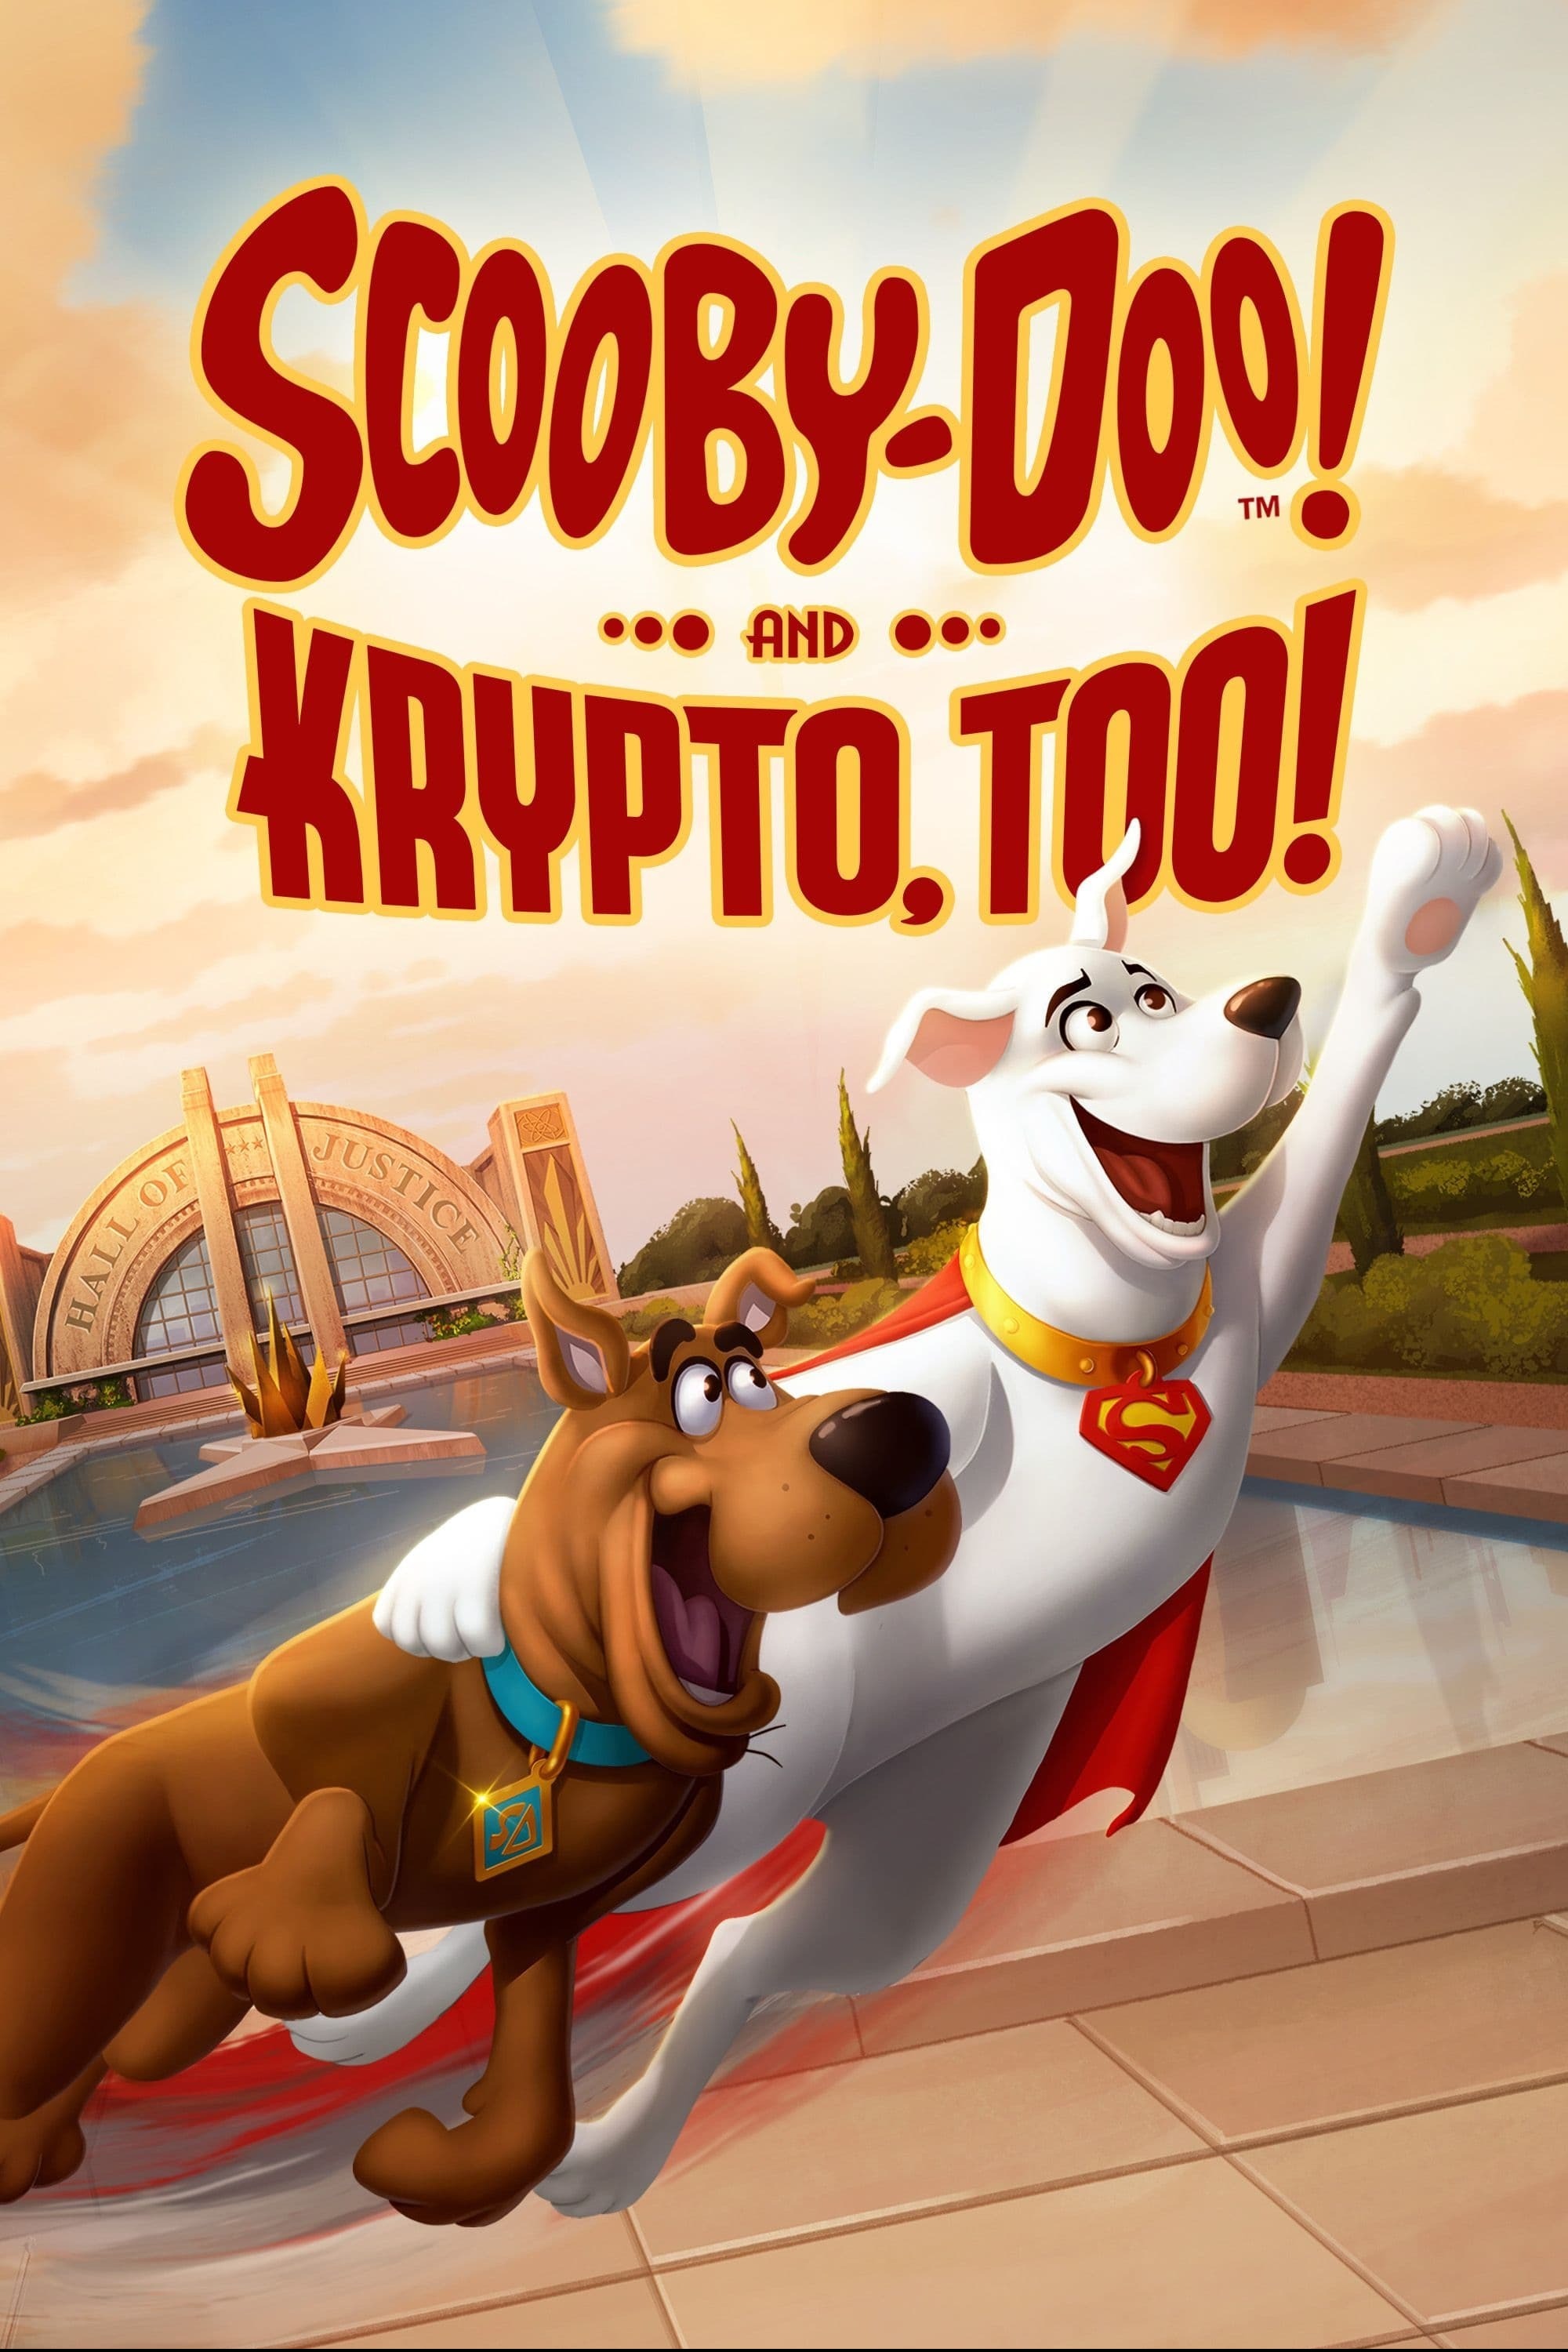 scooby-doo-and-krypto-too-where-to-watch-and-stream-tv-guide